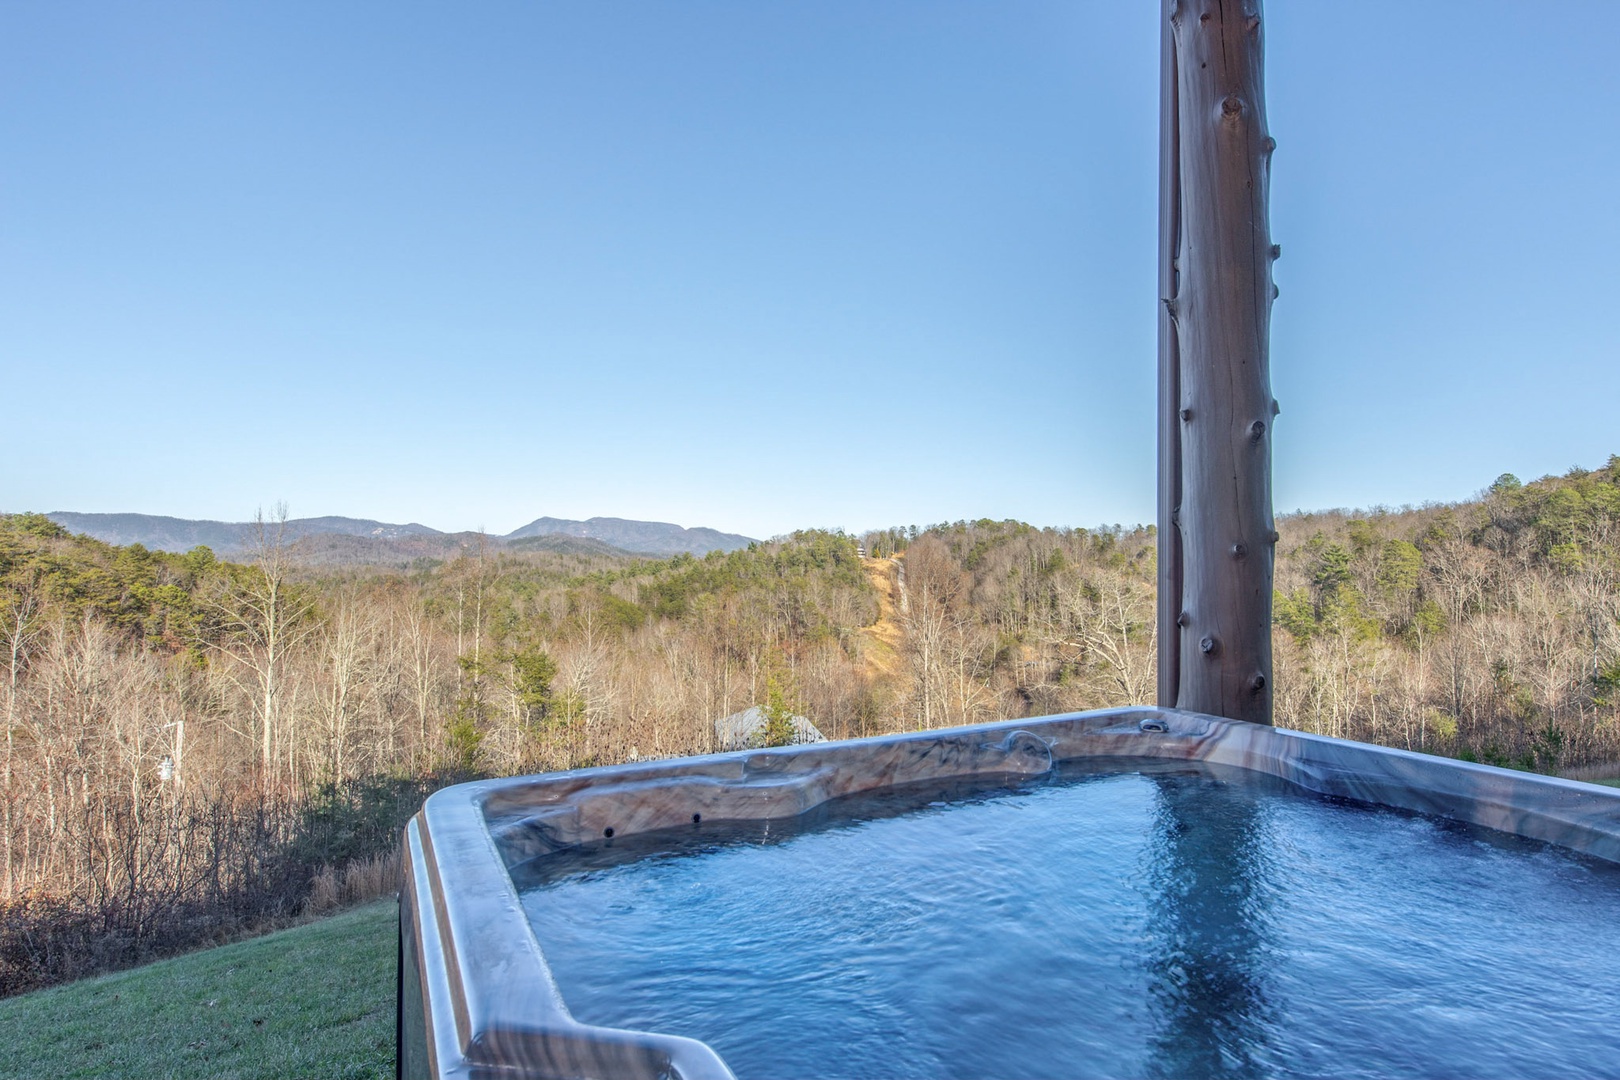 Soak the day away & take in the views in the private hot tub